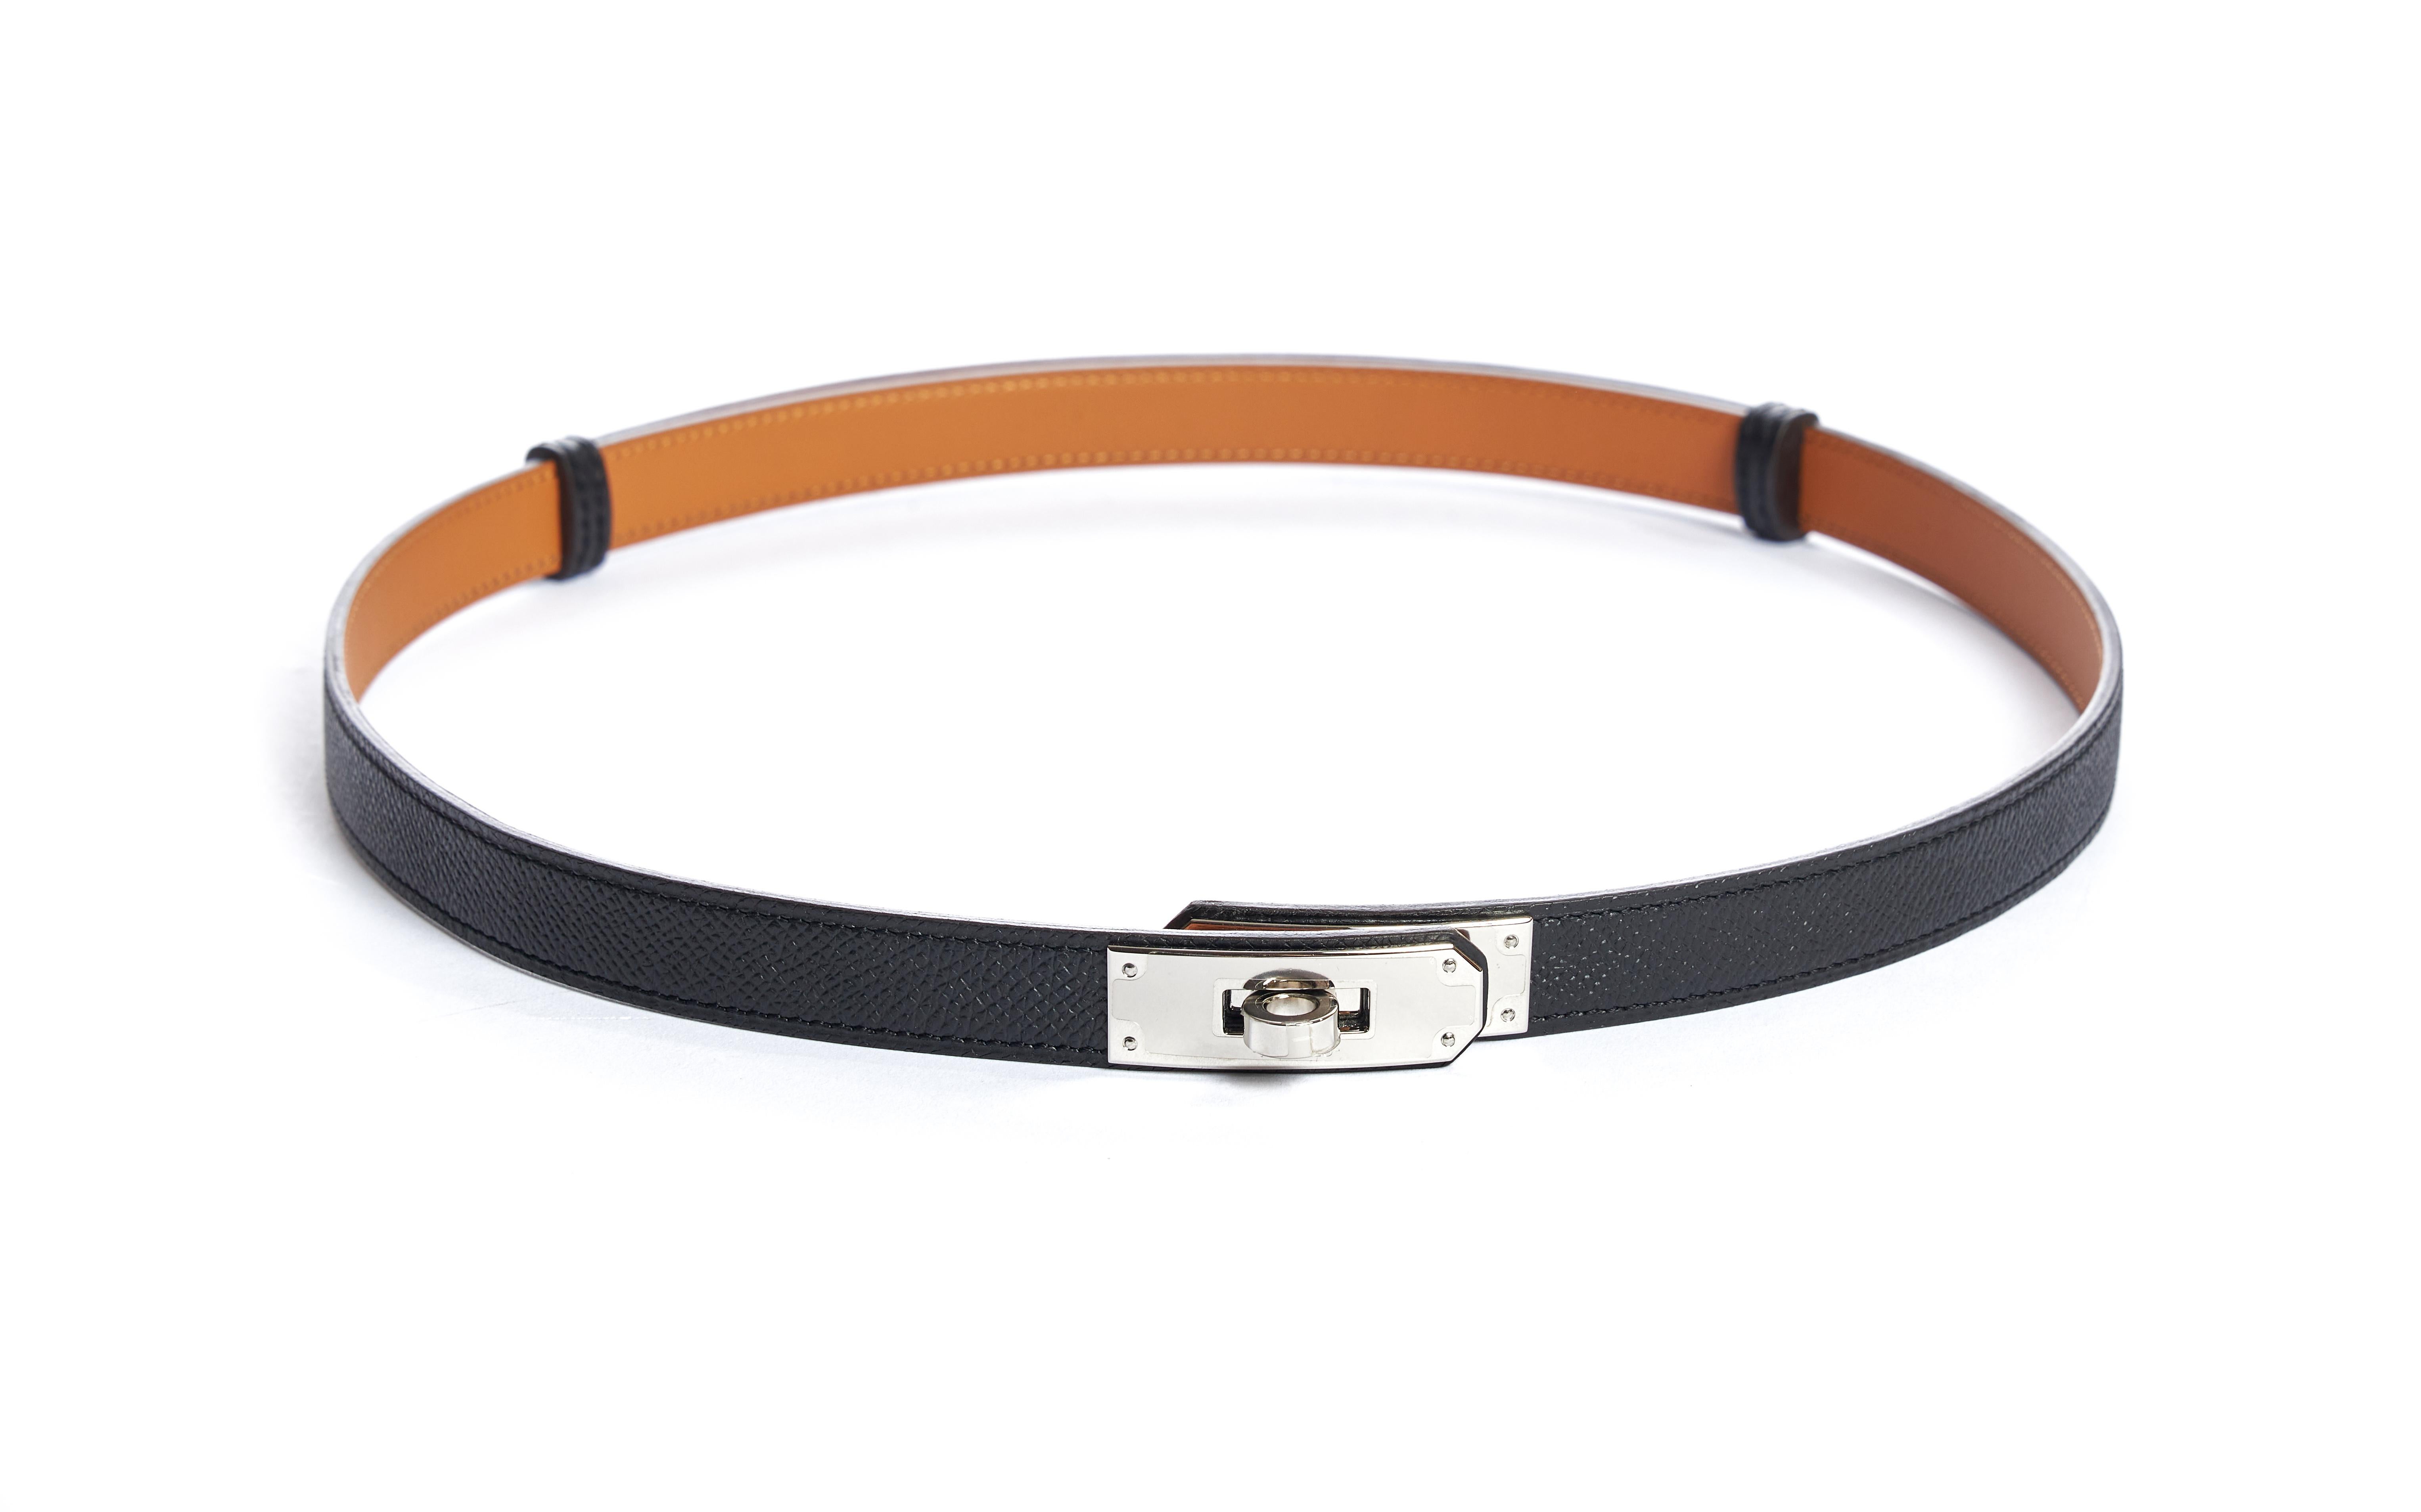 Hermès Kelly belt with signature closure. Black Epsom leather with gold interior. Date stamp T for 2015. Size adjustable; max length 100cm. Comes with dust cover, box, ribbon and gift bag. Never used.